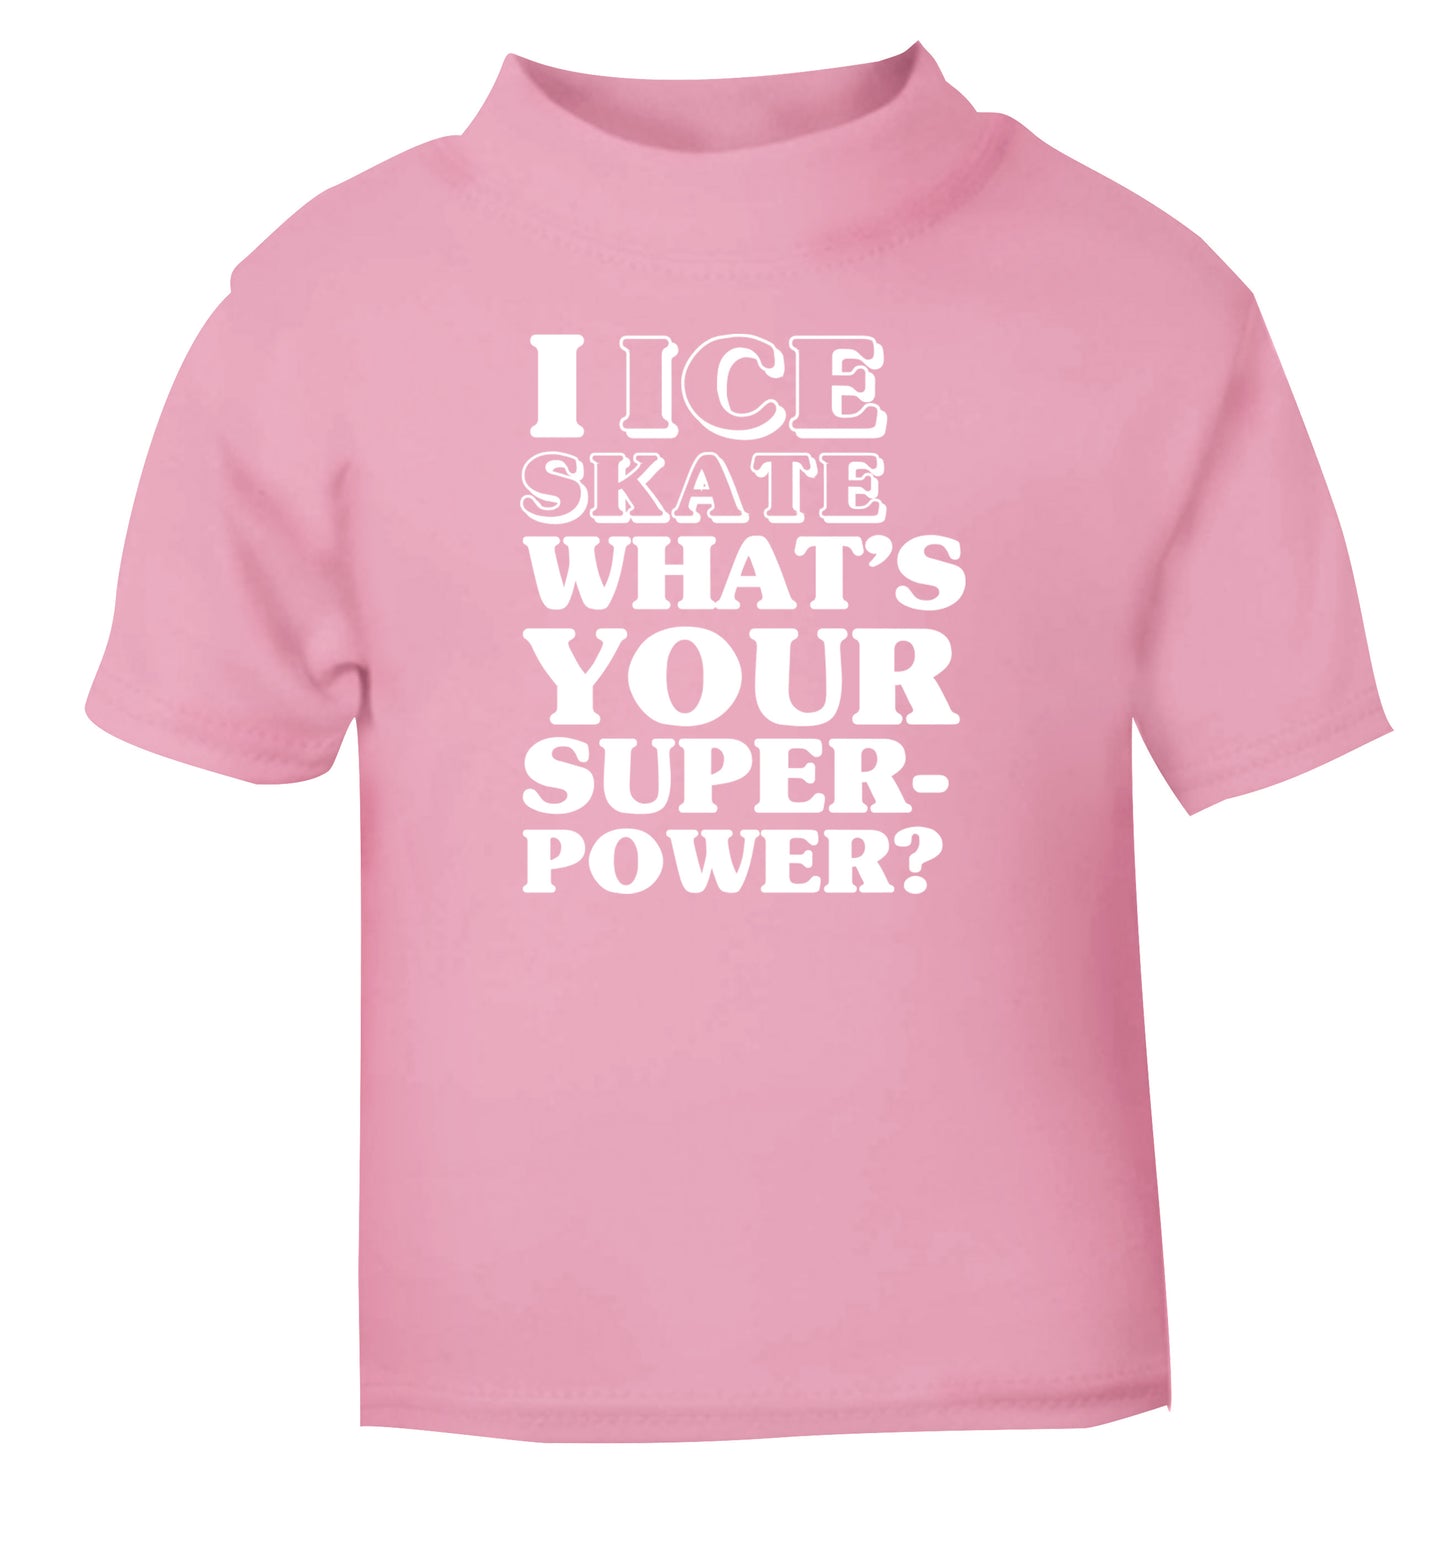 I ice skate what's your superpower? light pink Baby Toddler Tshirt 2 Years